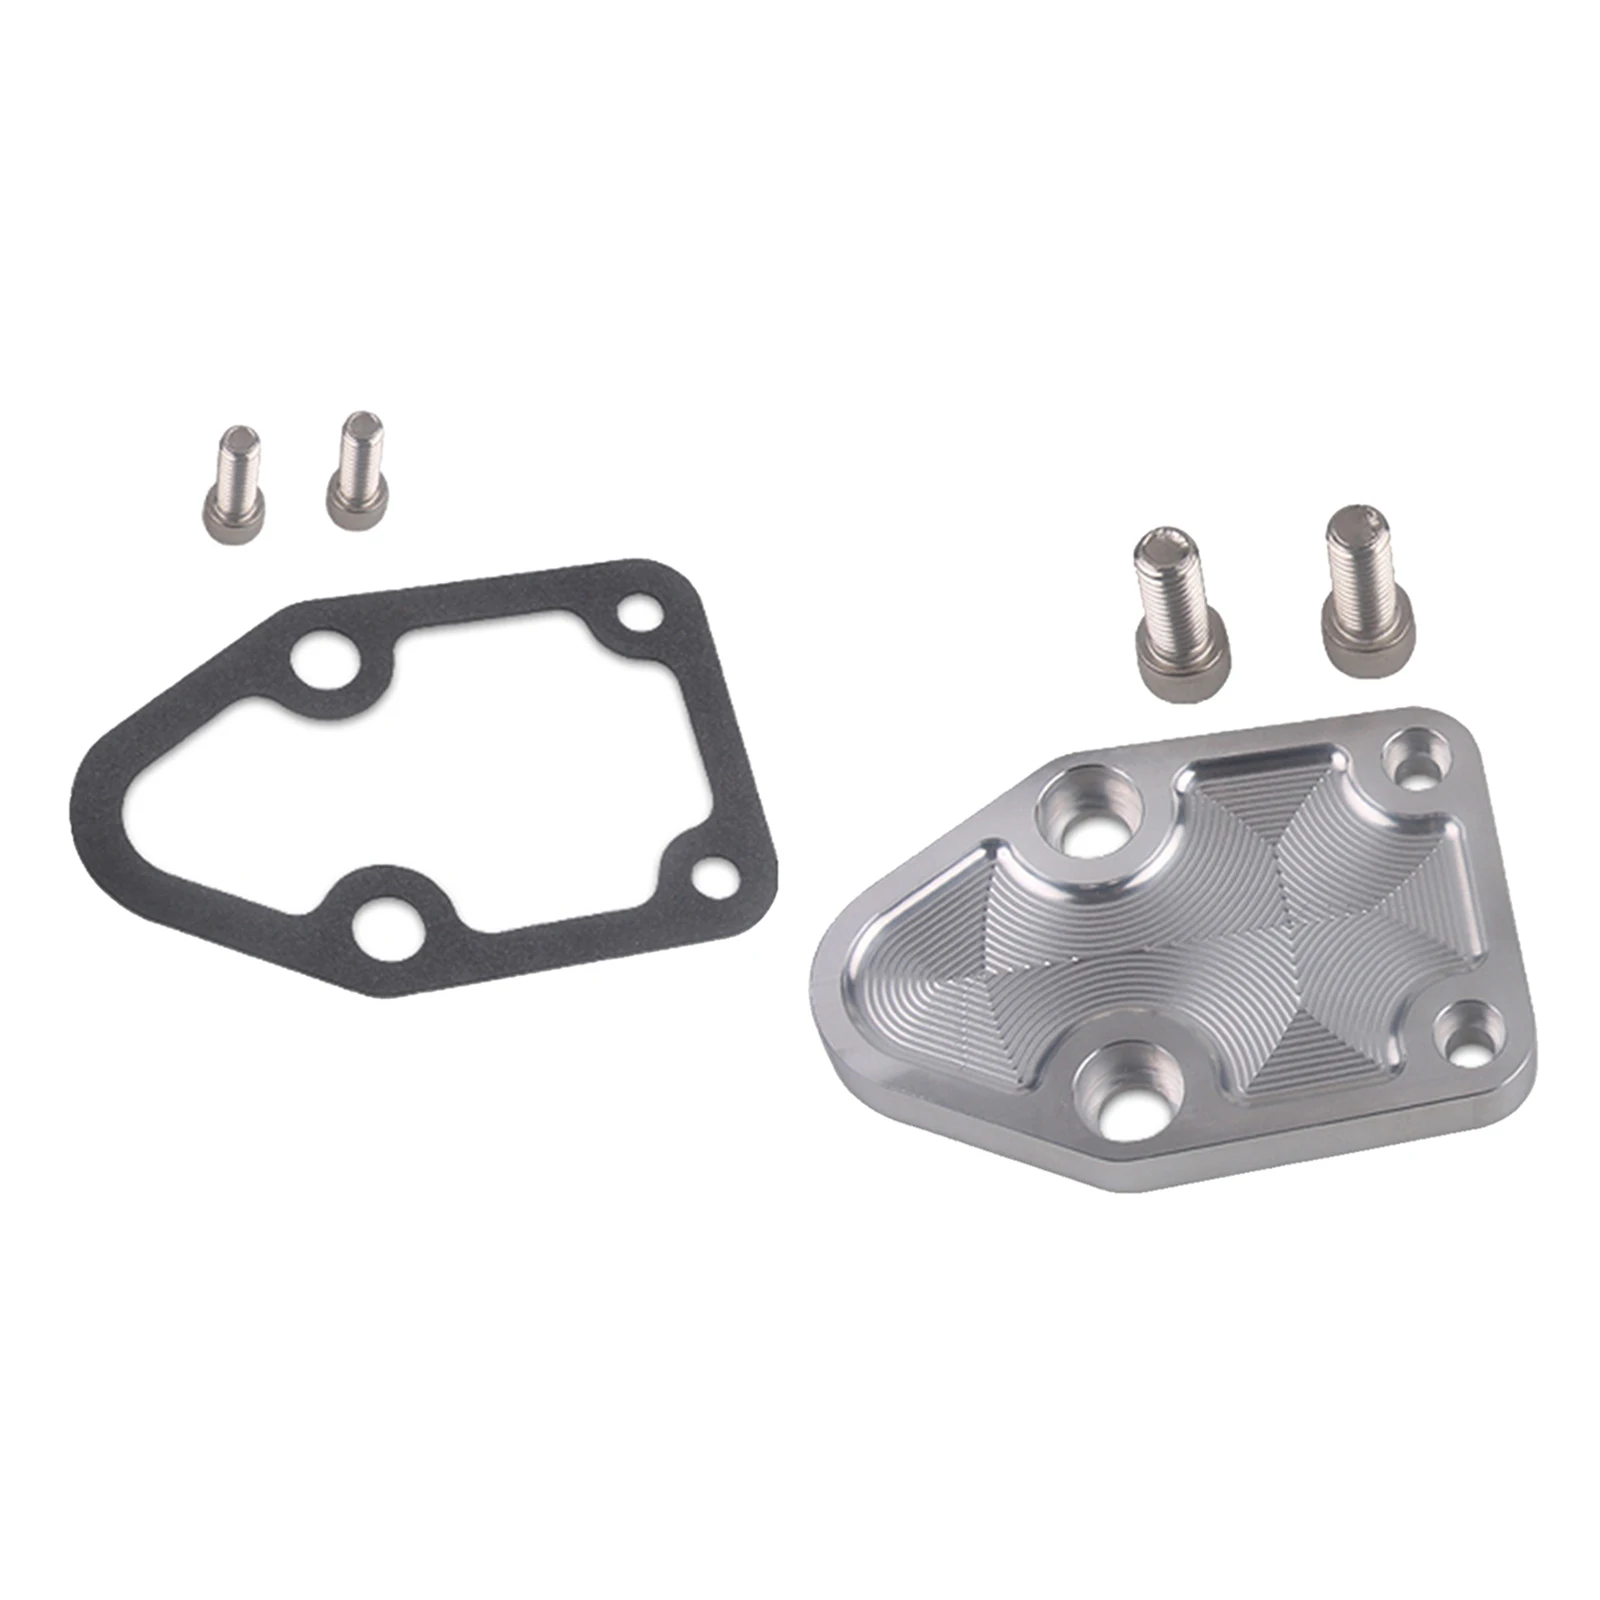 Aluminum Fuel Pump Plate Kit Replacement for CHEVY 283 305 327 350 400